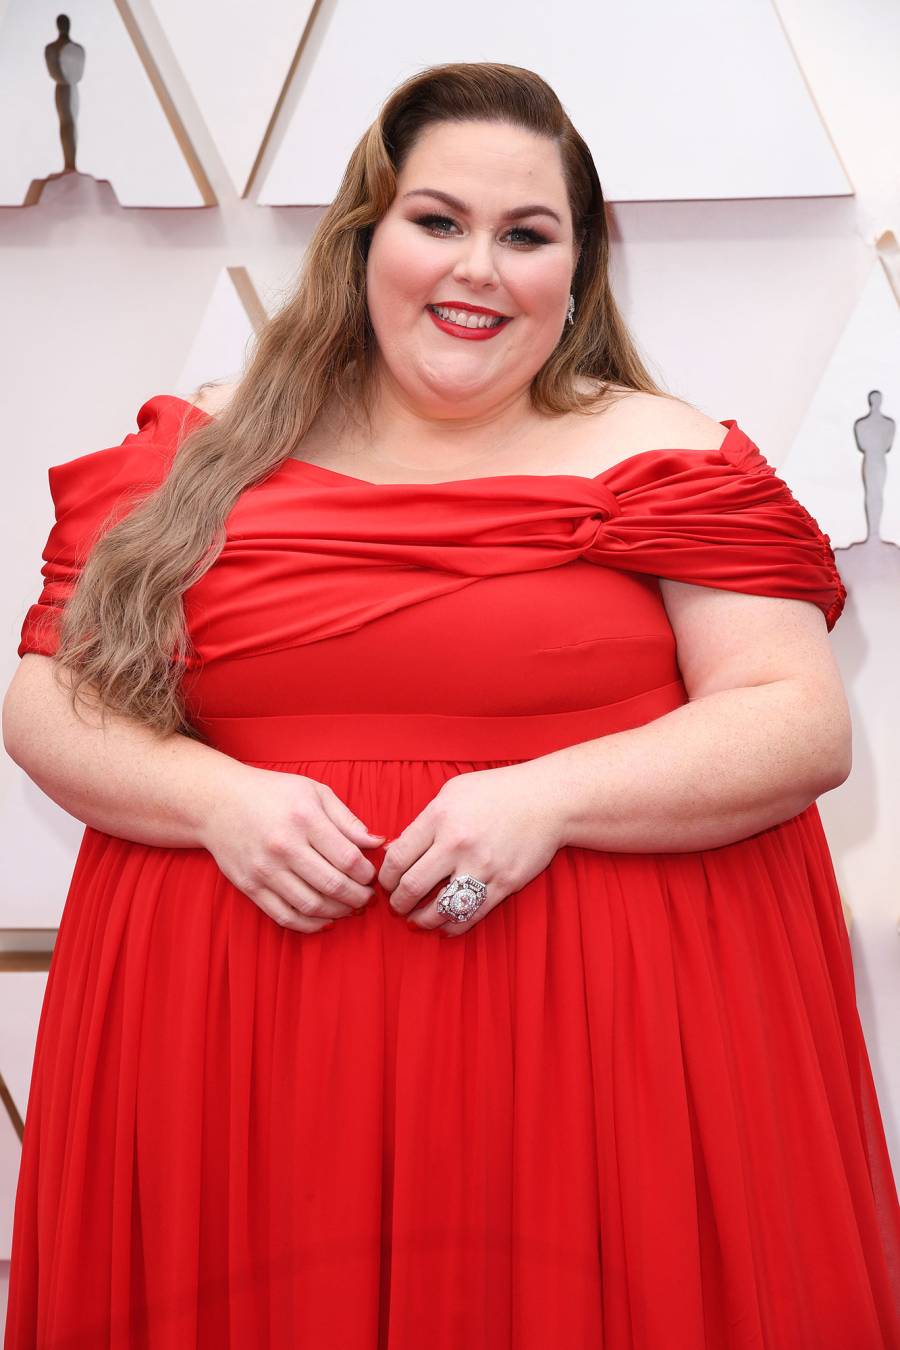 Chrissy Metz Stars Who Almost Quit Their Acting Careers